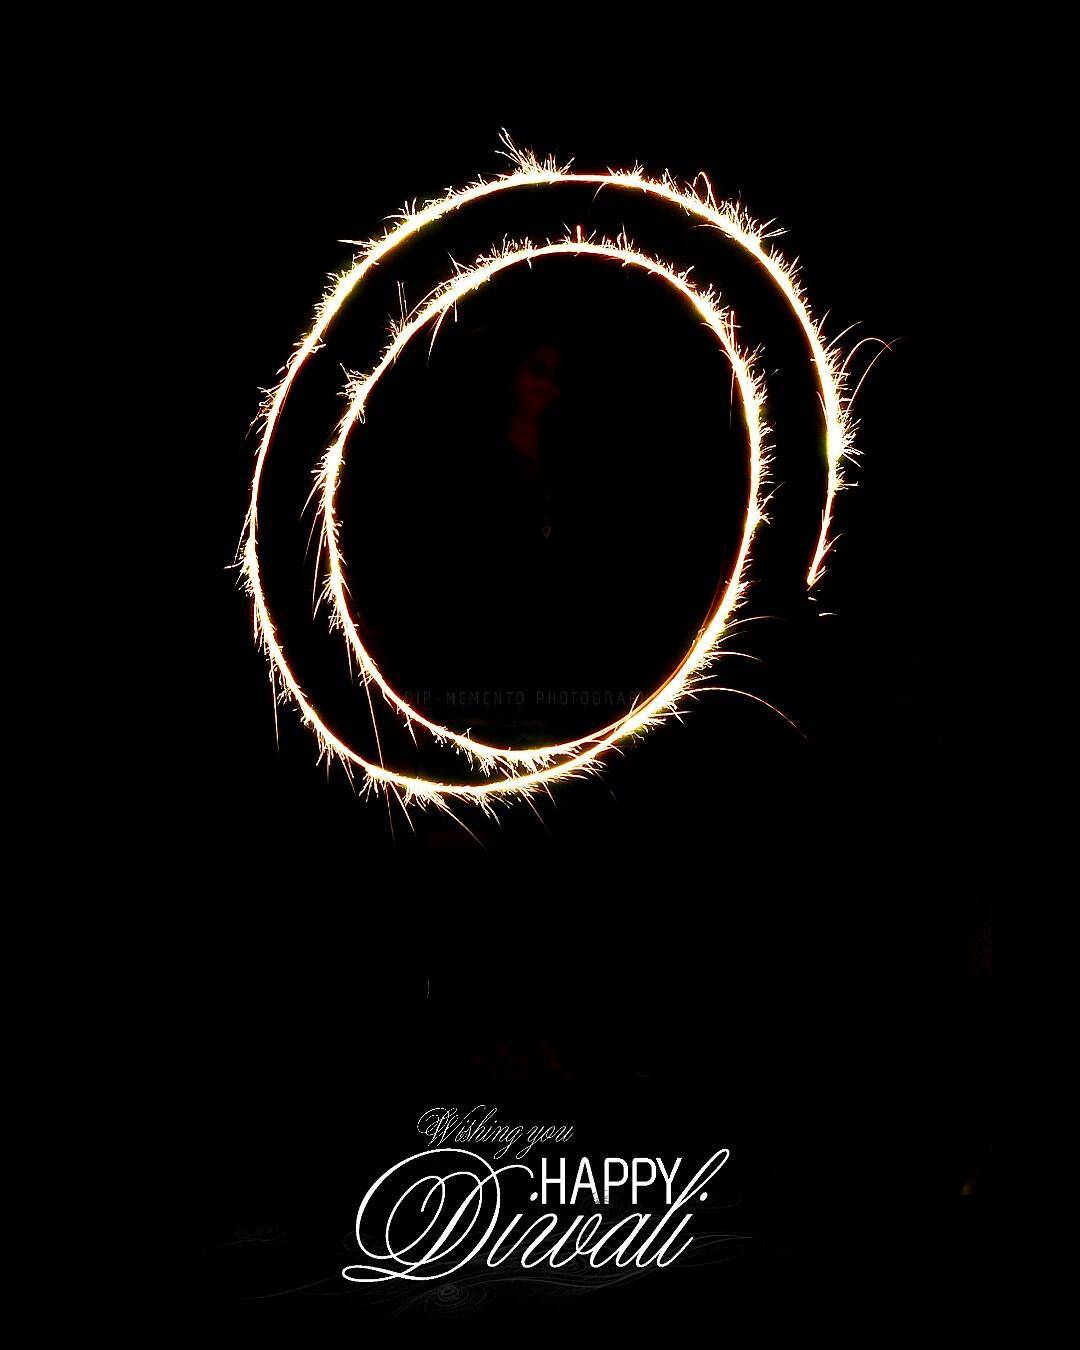 Sending you Happy smiles for every moment of your special day. Have a wonderful time and a very #HappyDiwali To all.

#photocontest #i_hobbygraphy #diwali #crackles #fireworks #festival #indiafastival #bigday #igerofindia #snapographers
#indianphotography #desi_diaries #desidiaries #indiaigers #ig_ahmedabad #ahmedabadi #amdavad #ahmedabaddiaries #_coi
#streetphotographyindia #ig_calcutta #photographers_of_india #MyPixelDiary
#dslrofficial #youthpowerahmedabad #_soi